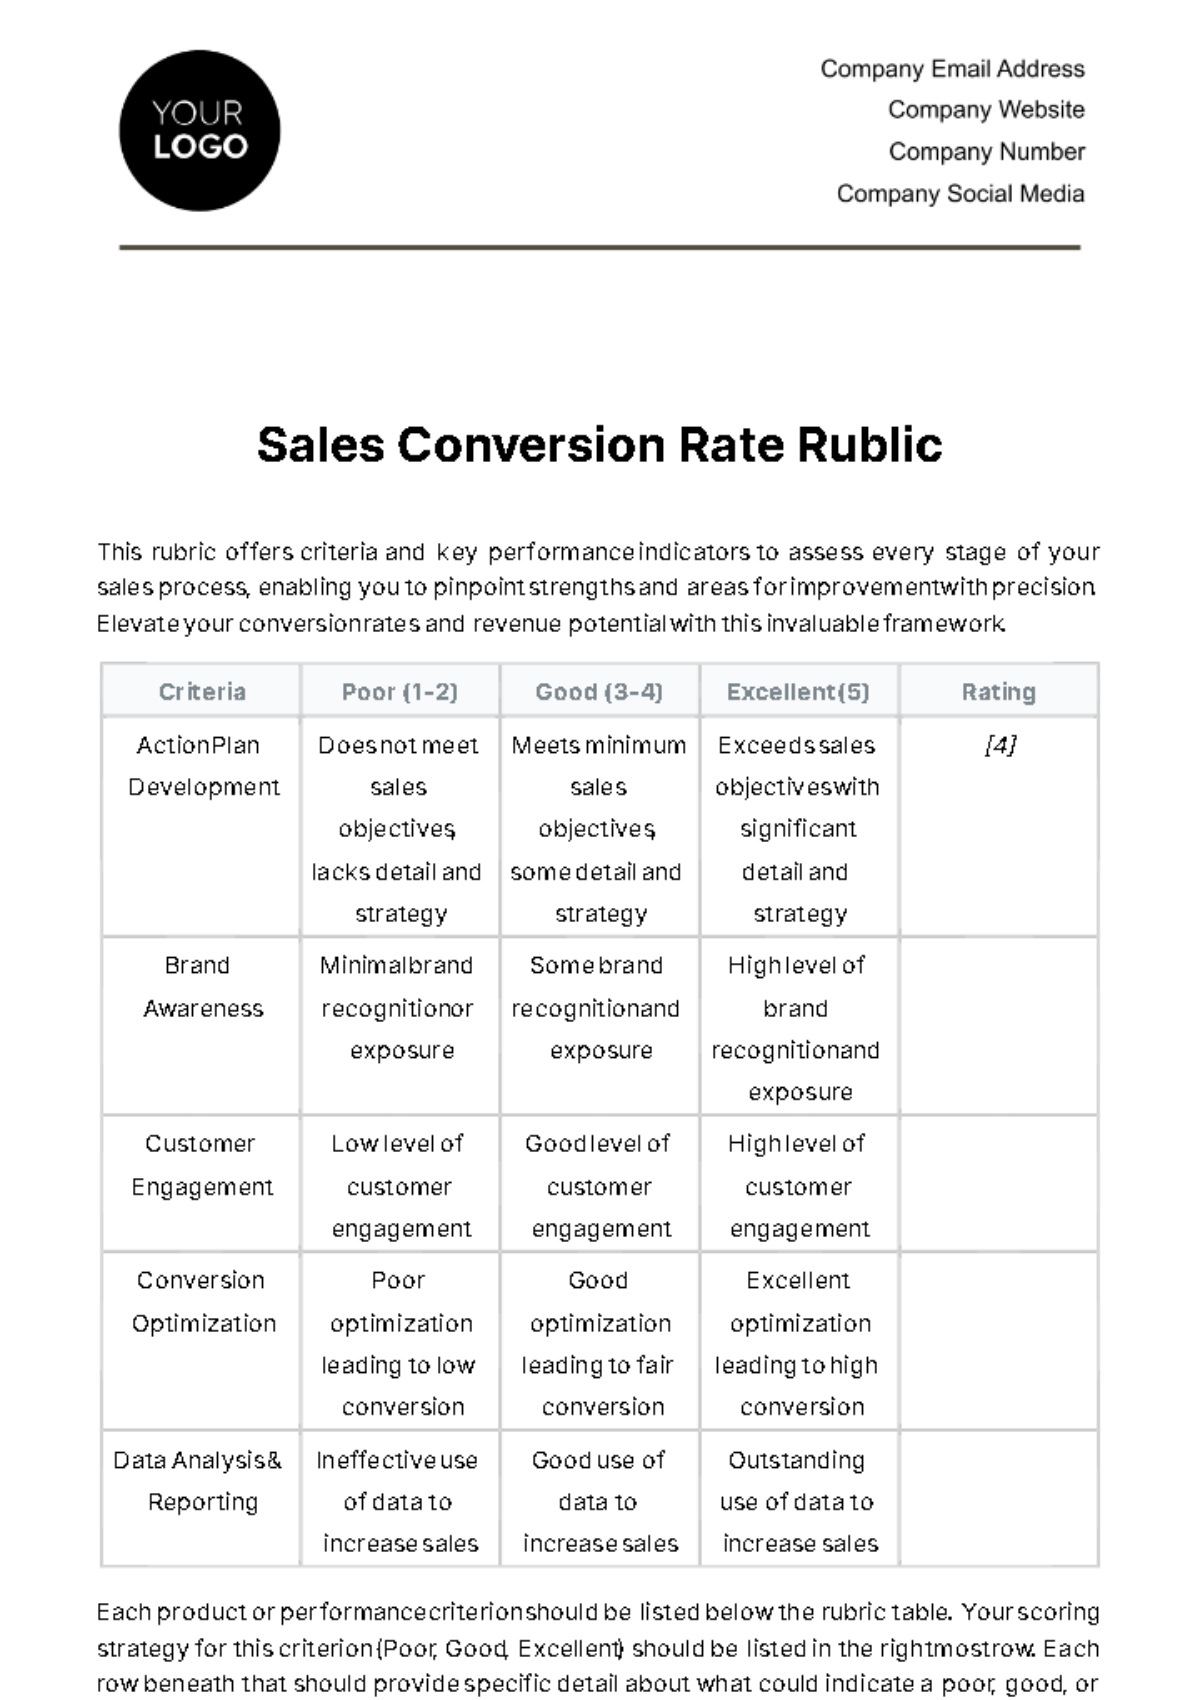 Sales Conversion Rate Rubric Template